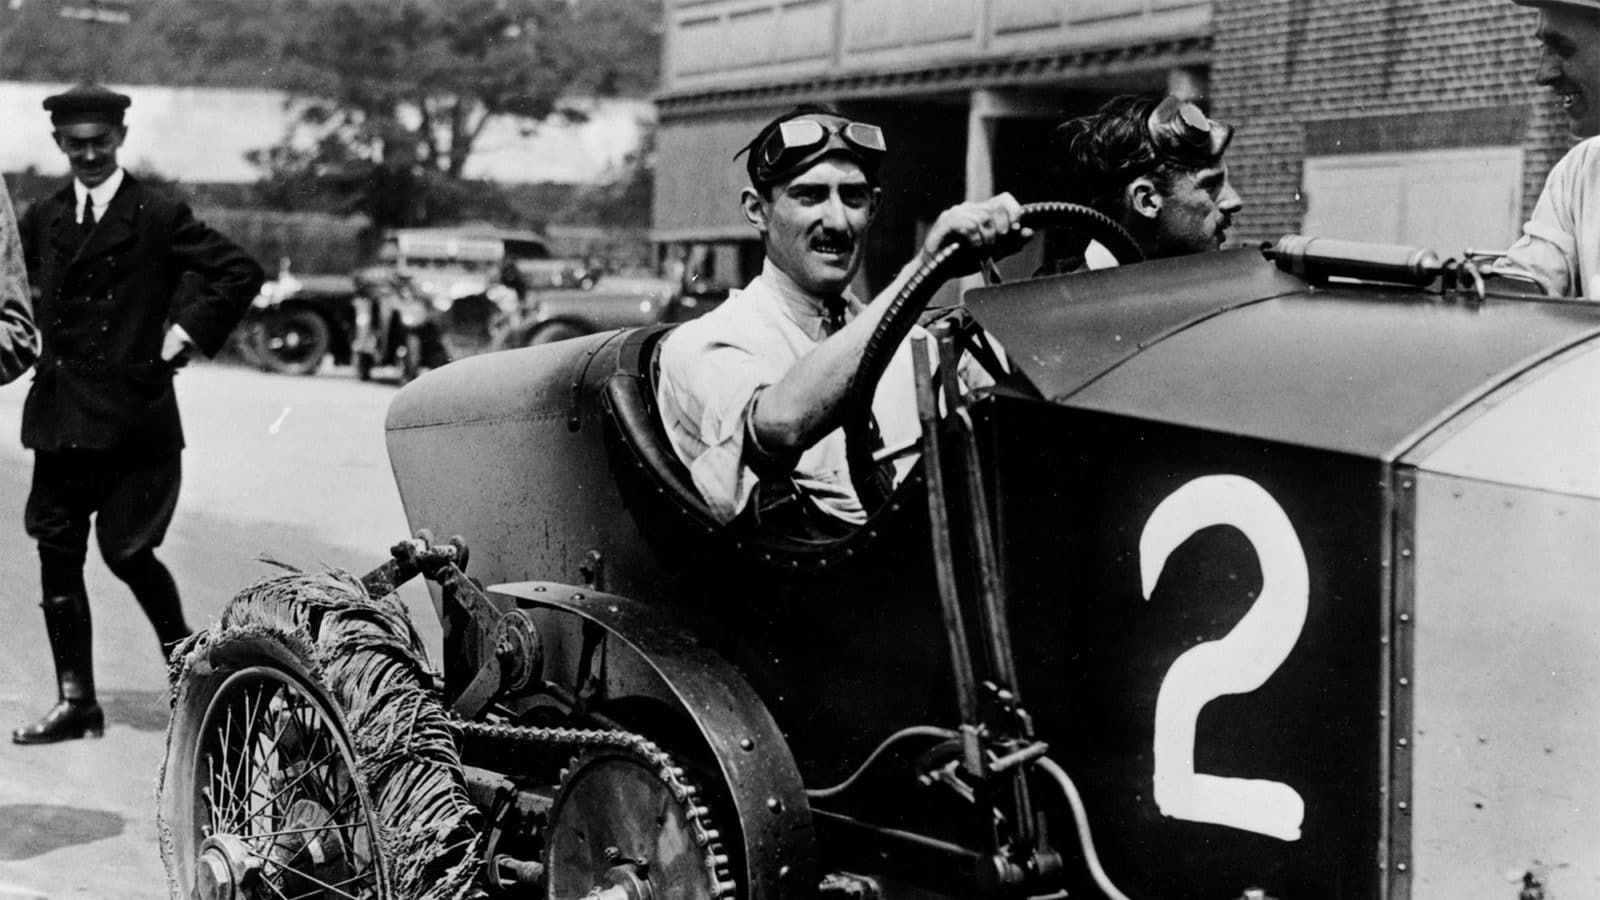 Louis Zborowski at the wheel of Chitty Bang Bang I, Brooklands, 1922. With a burst tyre after readching a speed of 125mph. Zborowski built three aero-engined cars all called Chitty Bang Bang. Chitty I's first win was the 100mph Brooklands Short Handicap at a speed of 100.75 mph. By the summer of 1921 Chitty 2 was under construction. Both Chittys ran at the 1921 autumn season at Brooklands. During the Whitsun 1922 Brooklands meeting Chitty 1 achieved her fastest lap of 113.45 mph. The 'Chitty Chitty Bang Bangs' were immortalised in the famous film 'Chitty Chitty Bang Bang'. (Photo by National Motor Museum/Heritage Images/Getty Images)